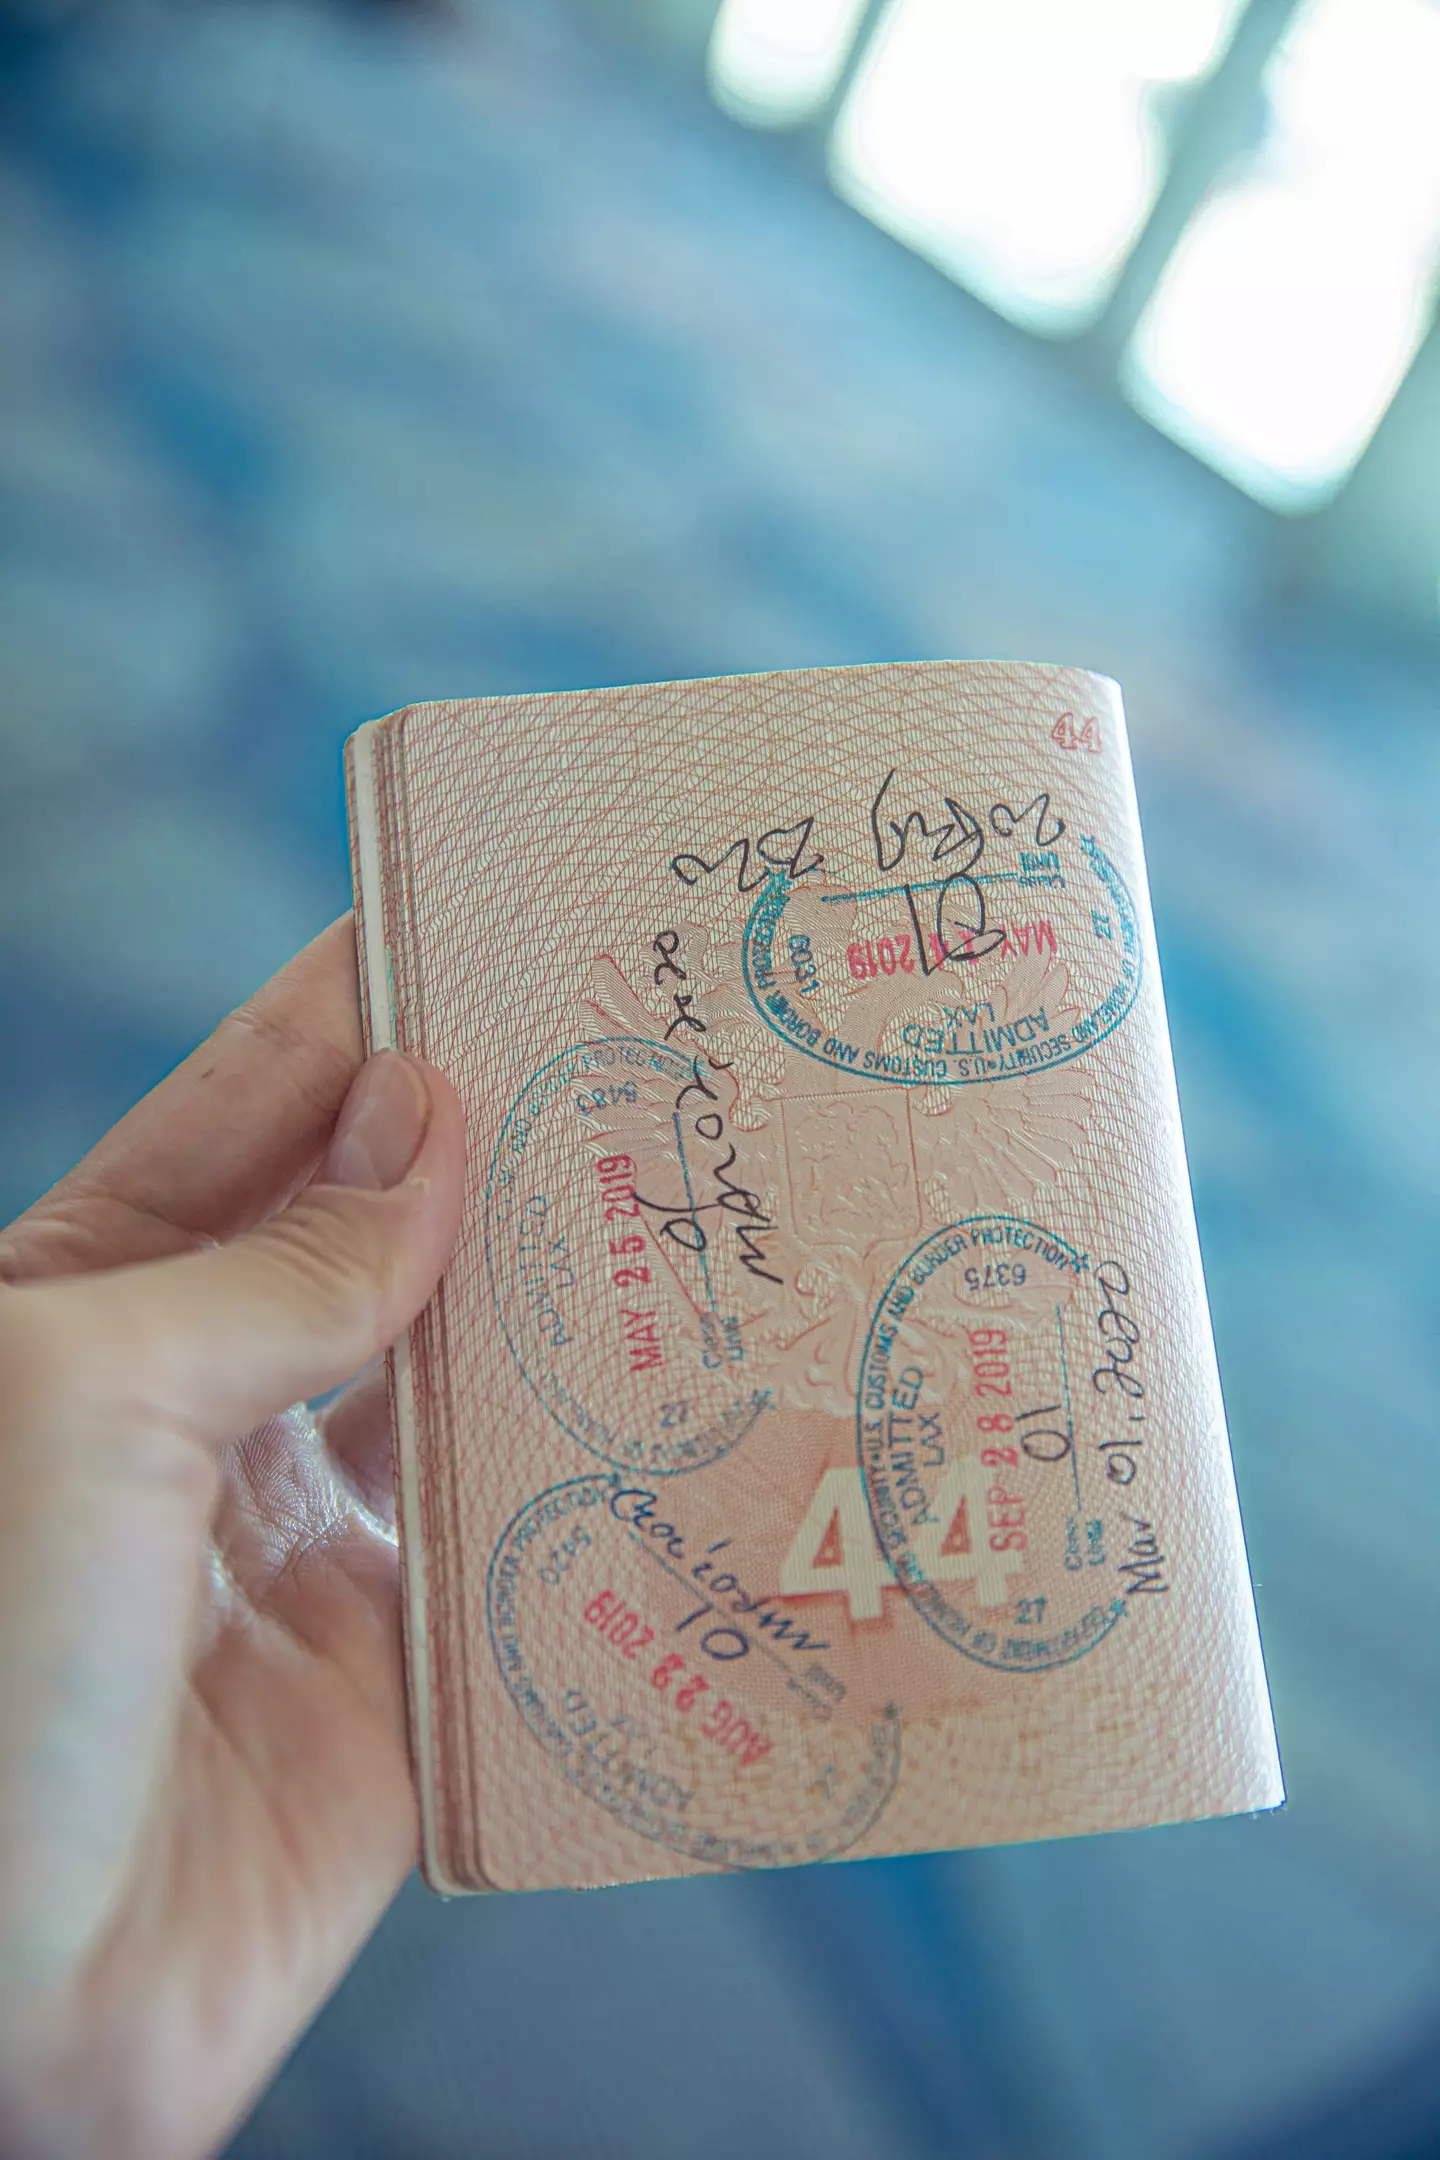 The top passports allow you visa-free travel to the most destinations.